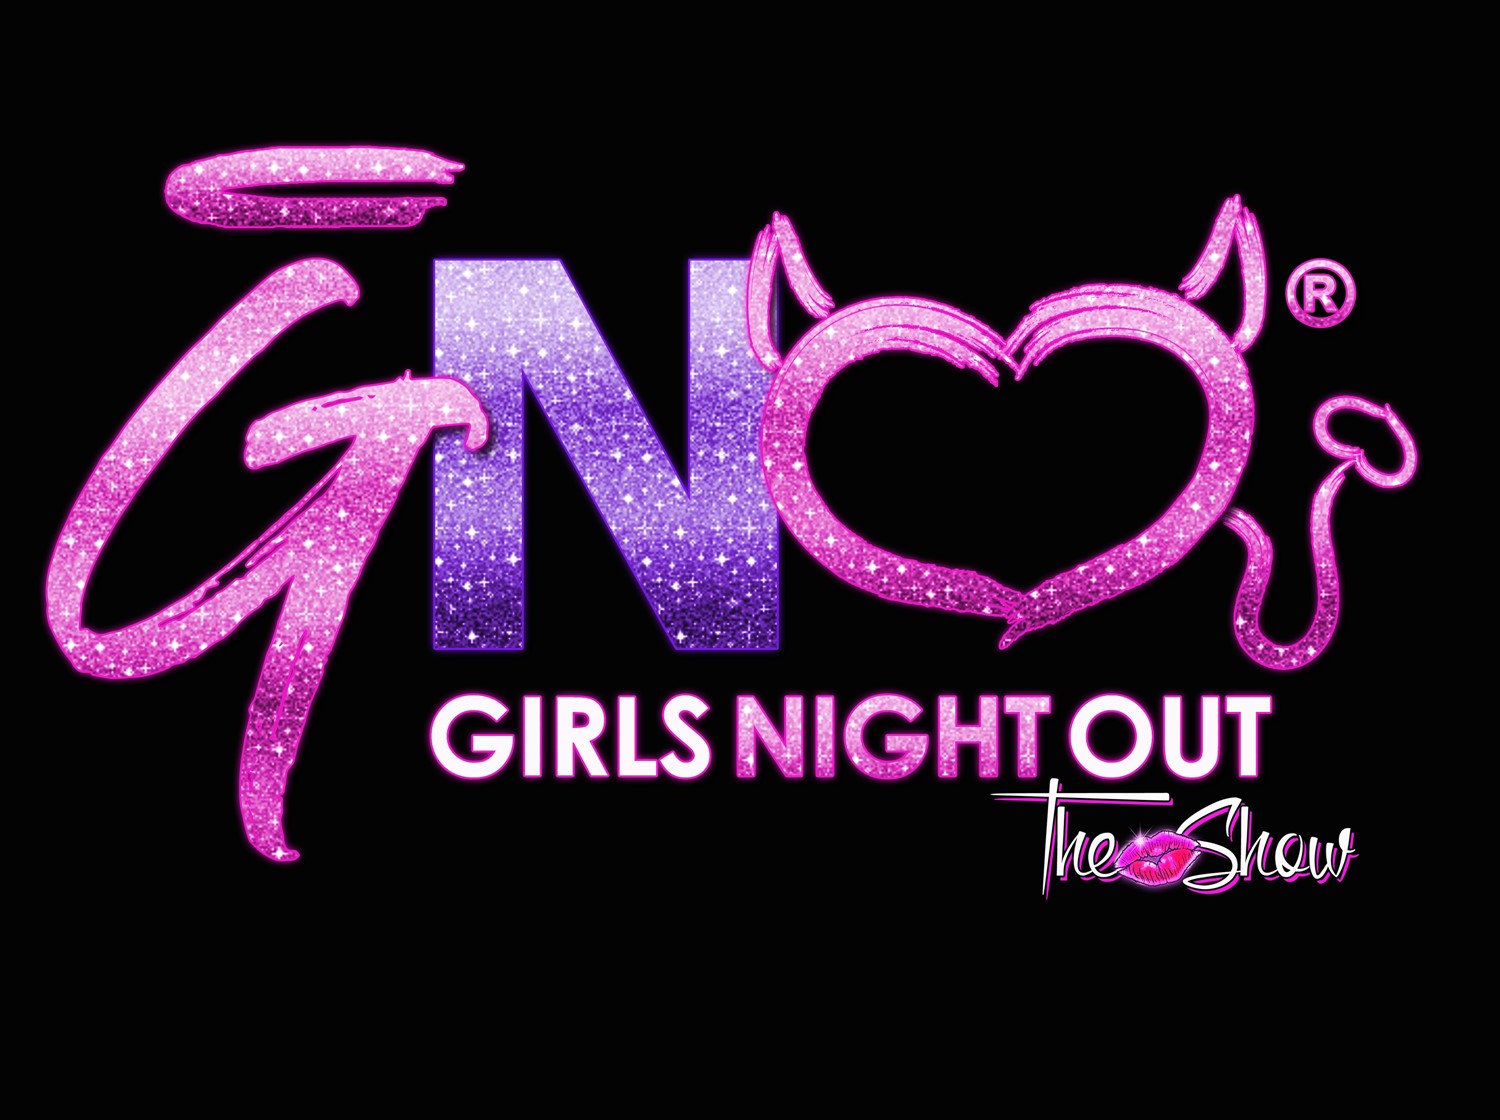 Cabbana Grill (21+) Shepherdsville, KY on Jun 09, 19:00@Cabbana Grill - Buy tickets and Get information on Girls Night Out the Show tickets.girlsnightouttheshow.com